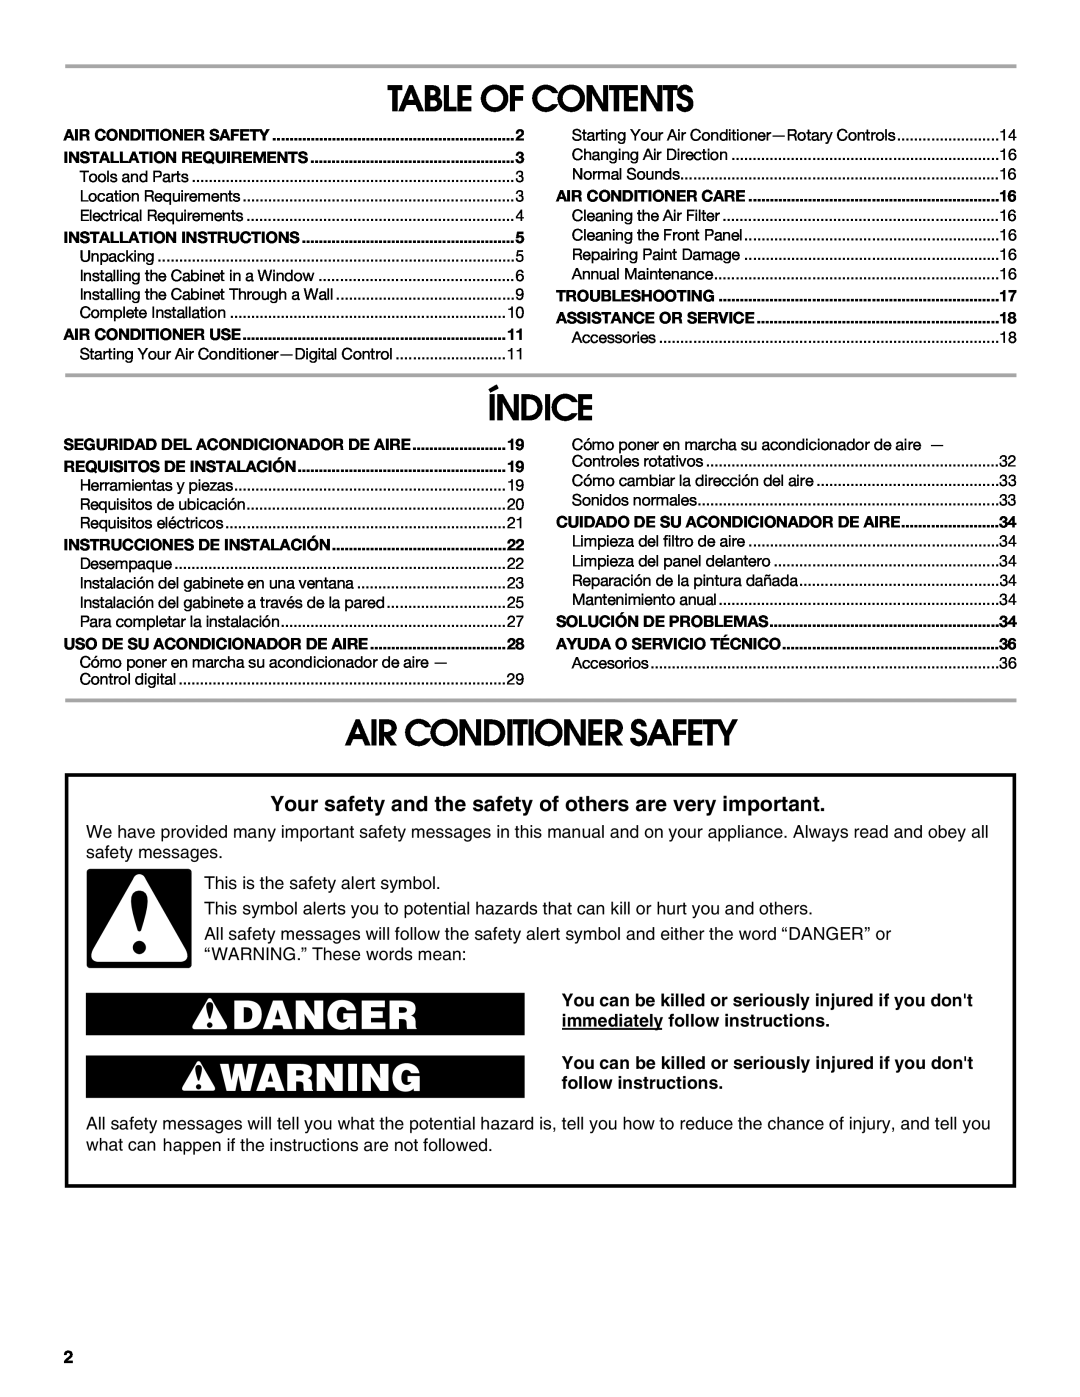 Whirlpool ACE184XR0 manual Table Of Contents, Índice, Air Conditioner Safety 